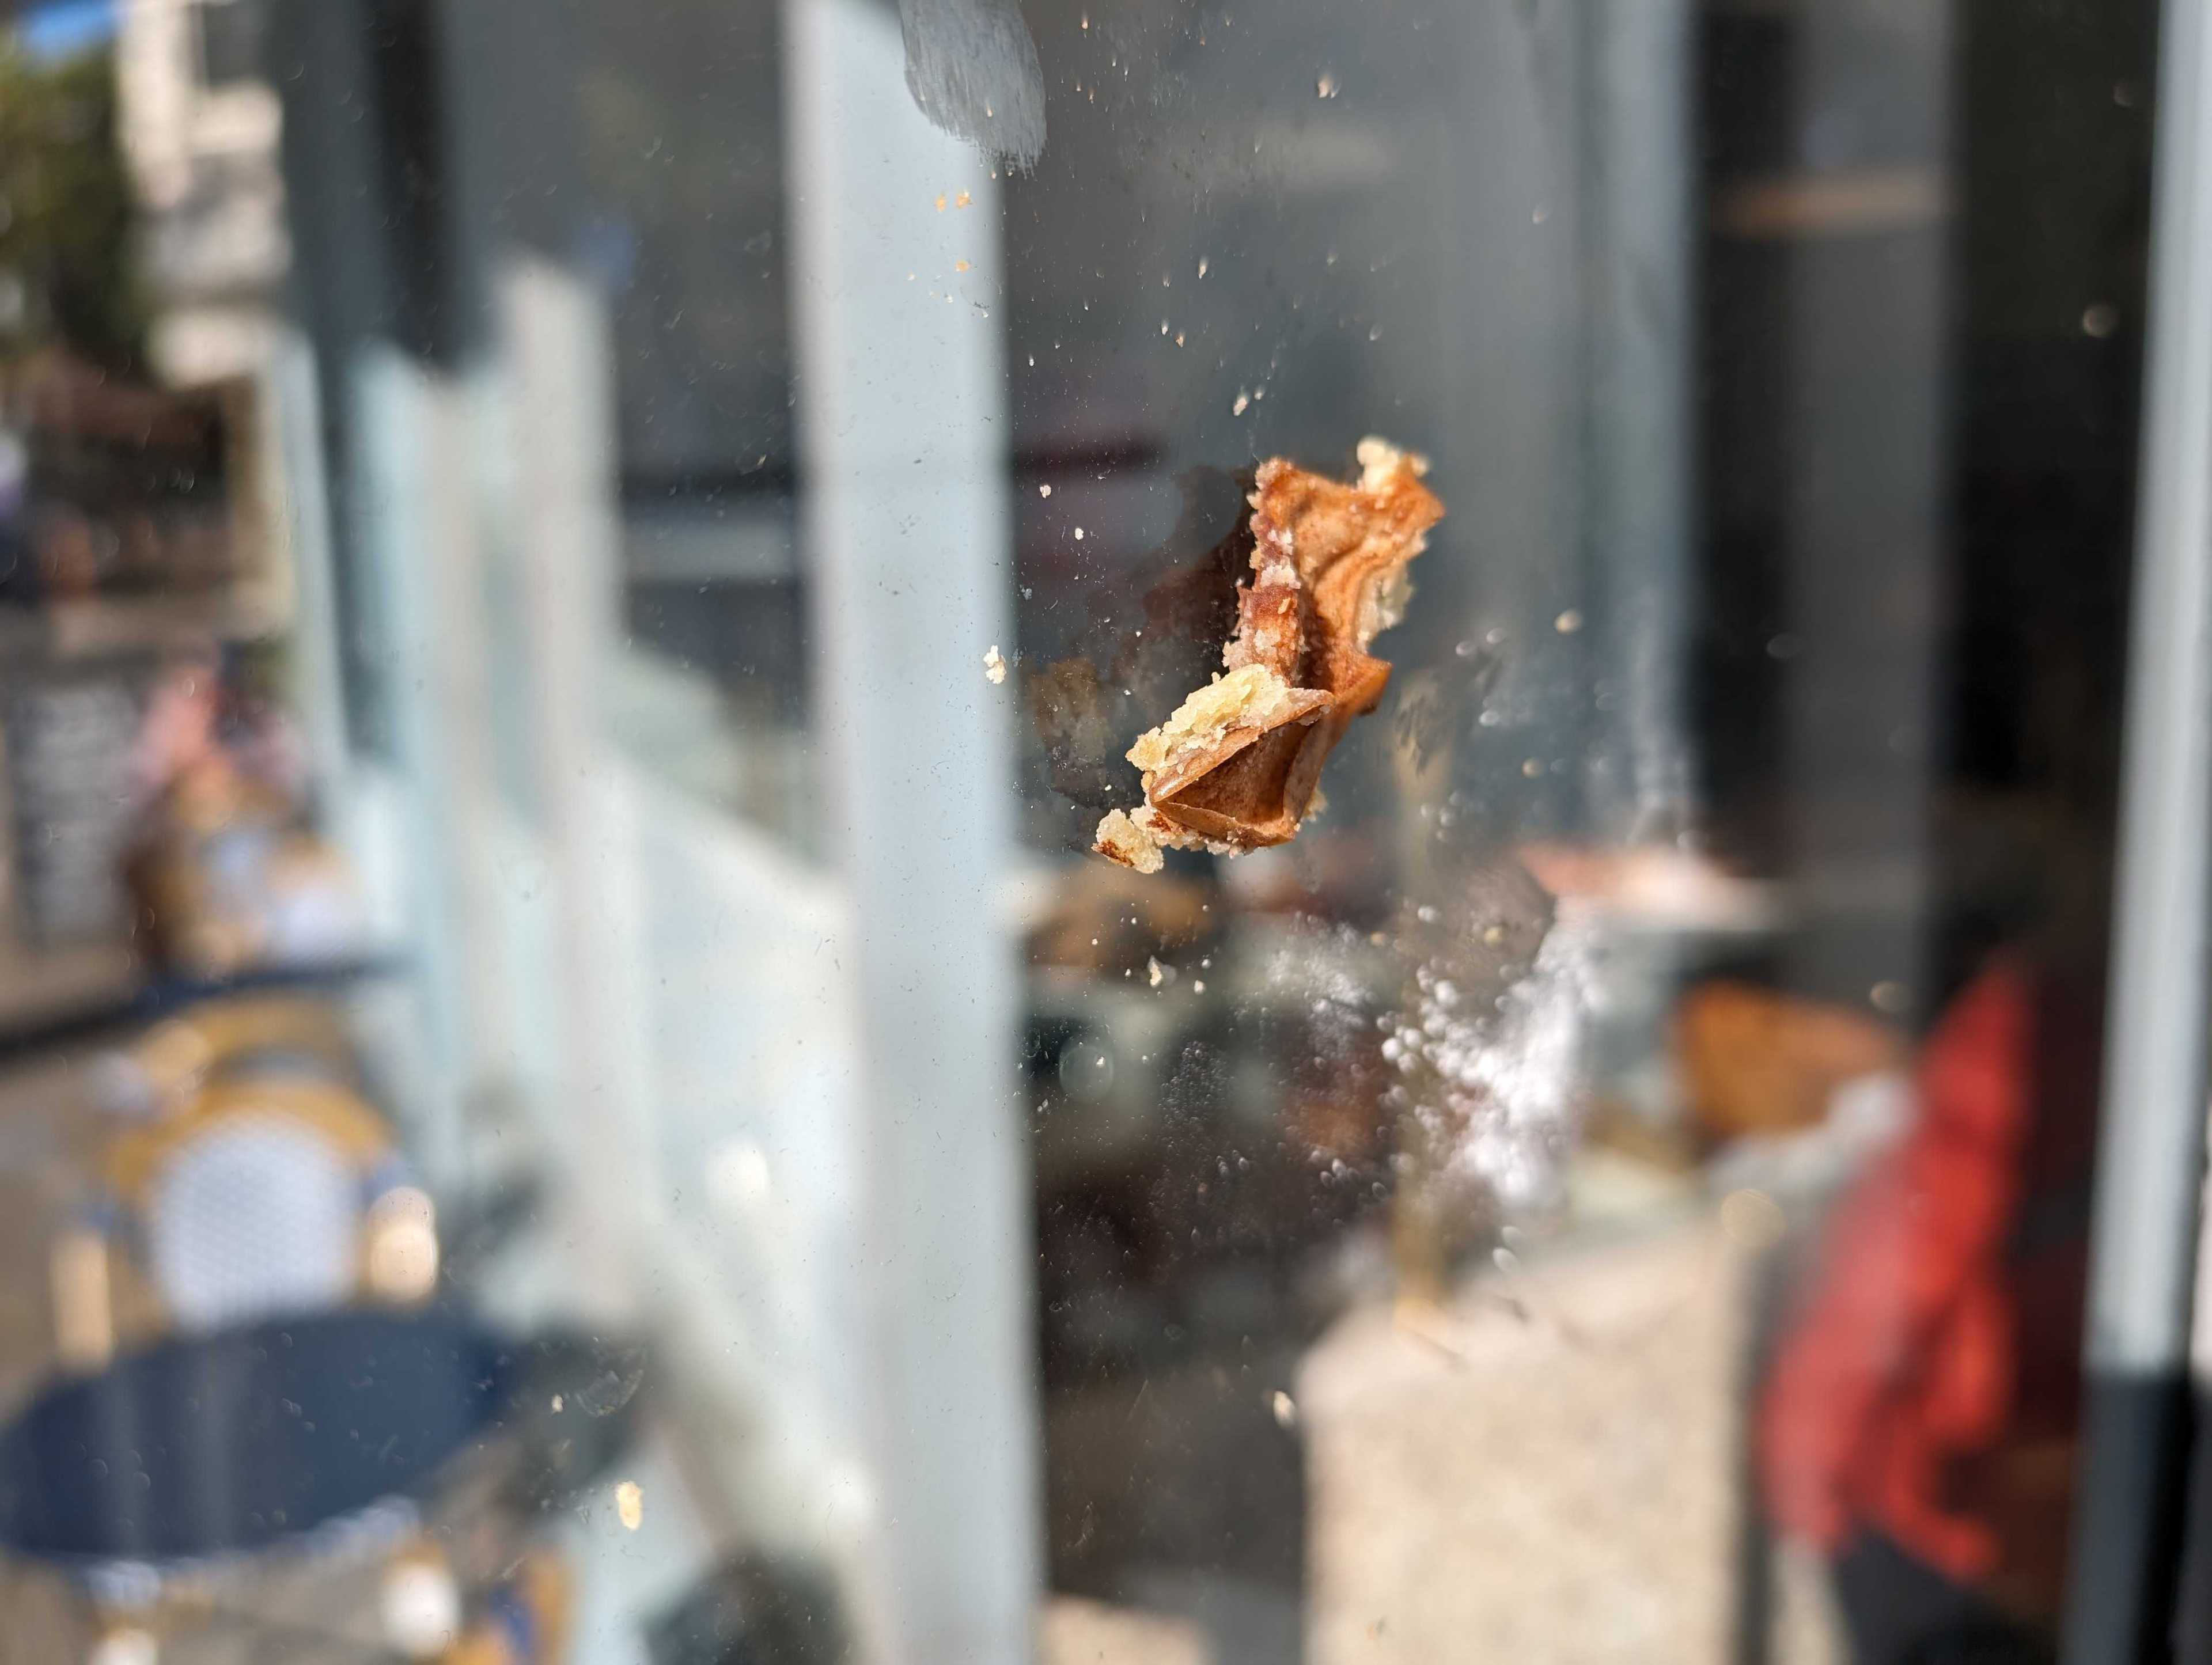 A small piece of pastry sticks to a cafe's glass window in bright sunshine